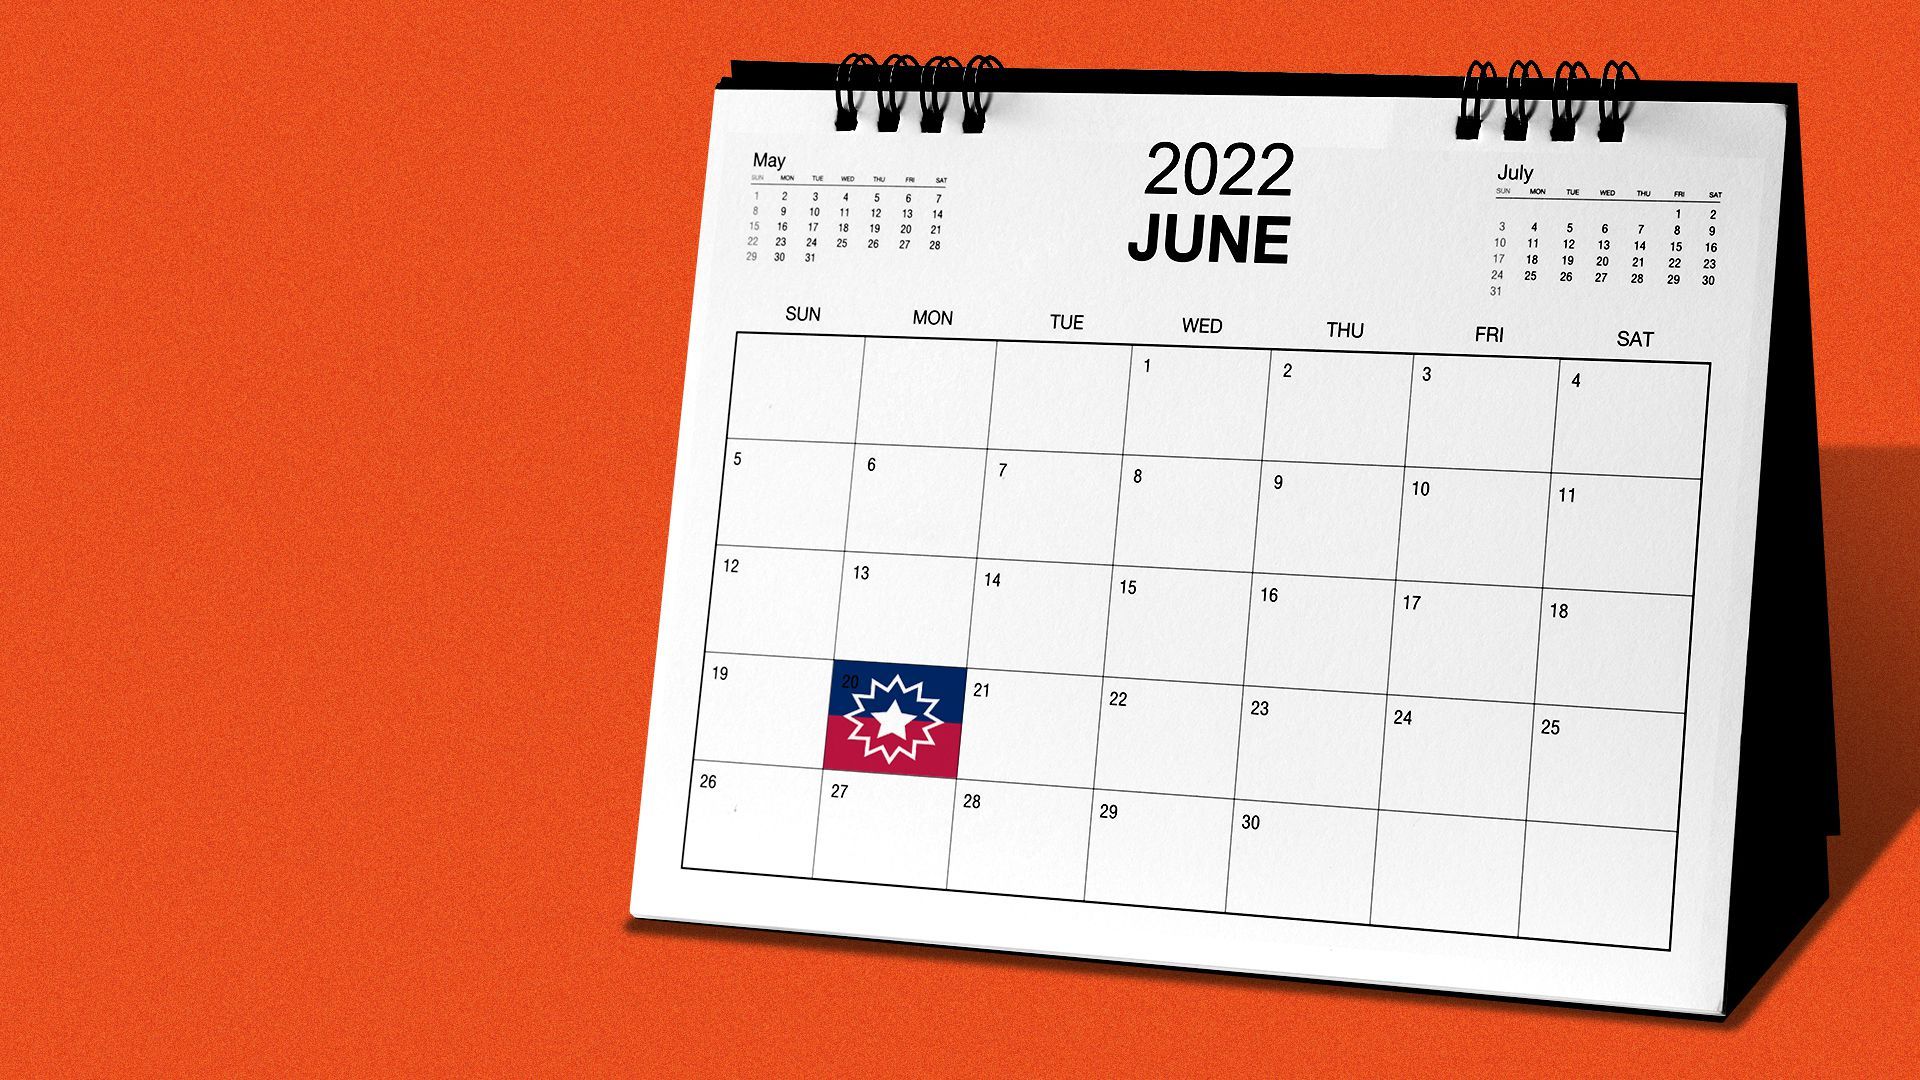 Illustration of the June 2022 calendar with the Juneteenth flag filling the Monday the 20th square